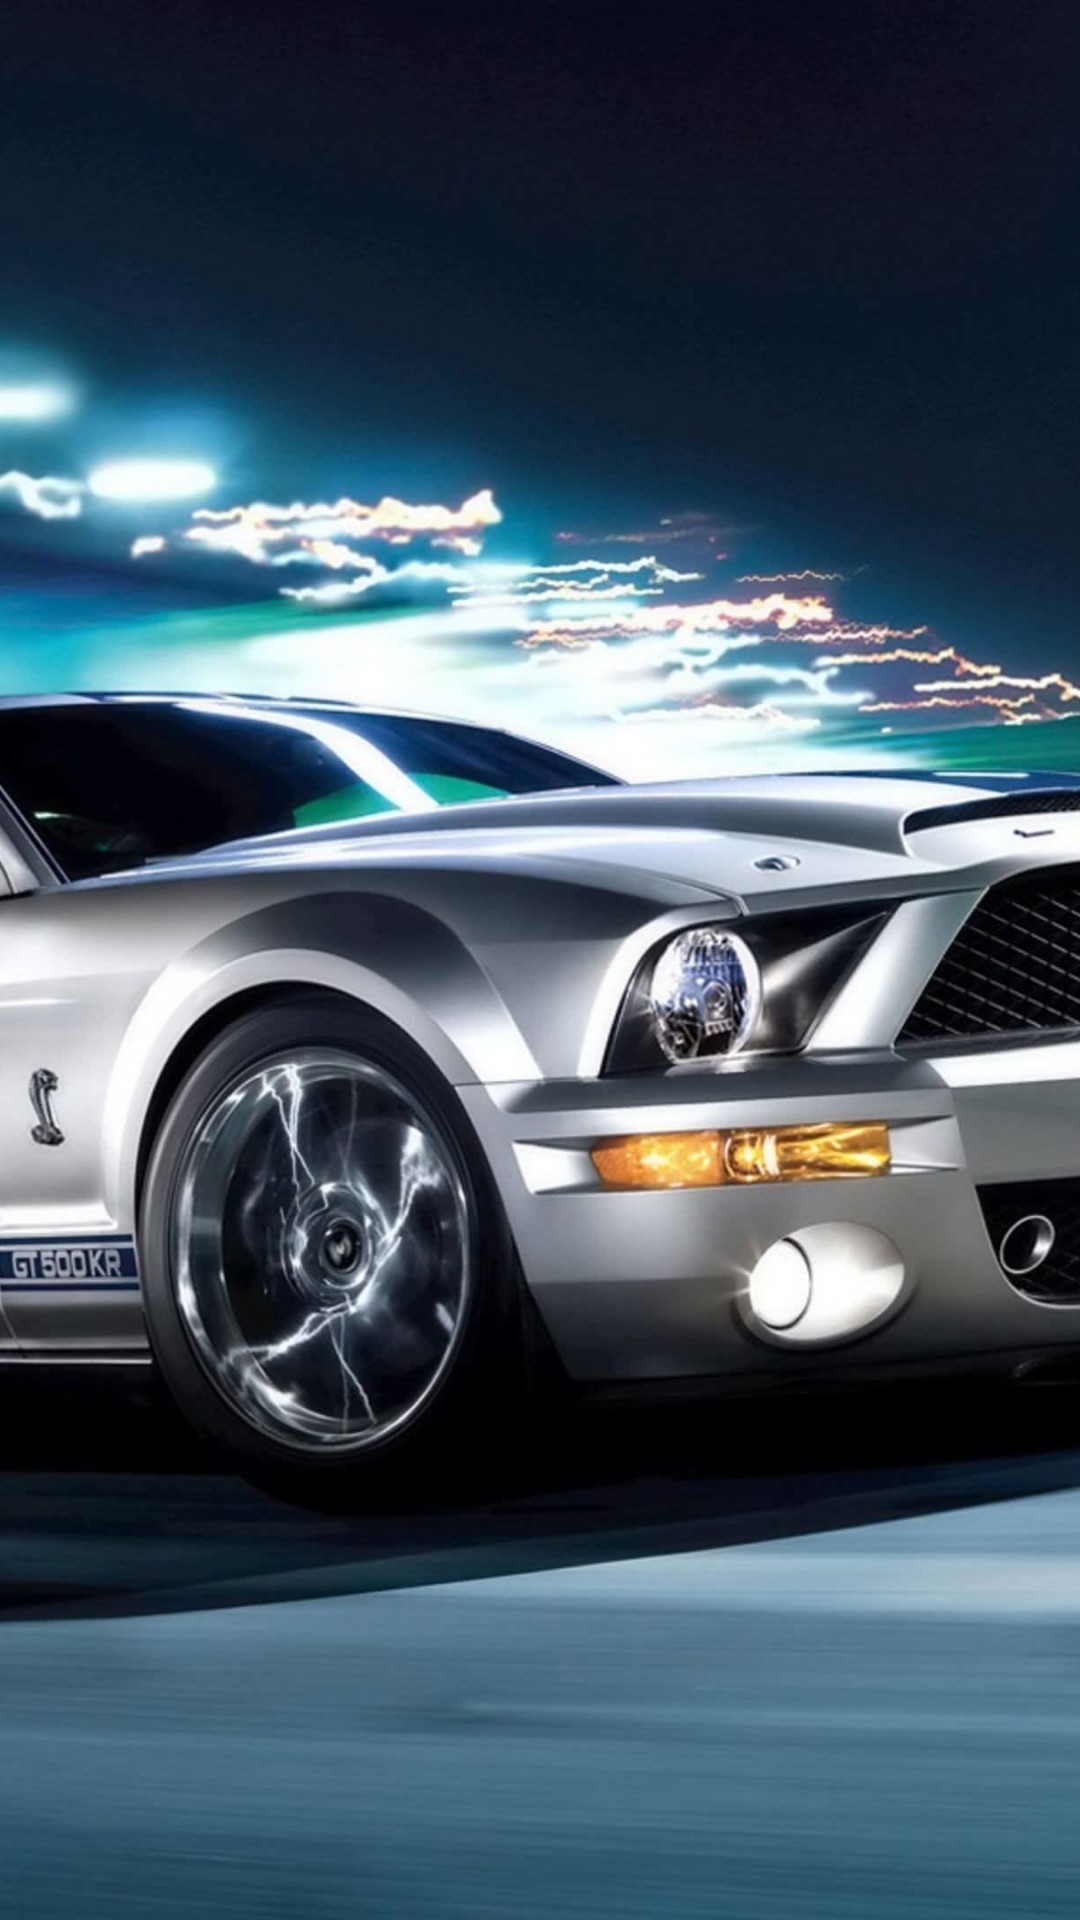 Ford Mustang Shelby GT500KR Wallpaper for HTC One